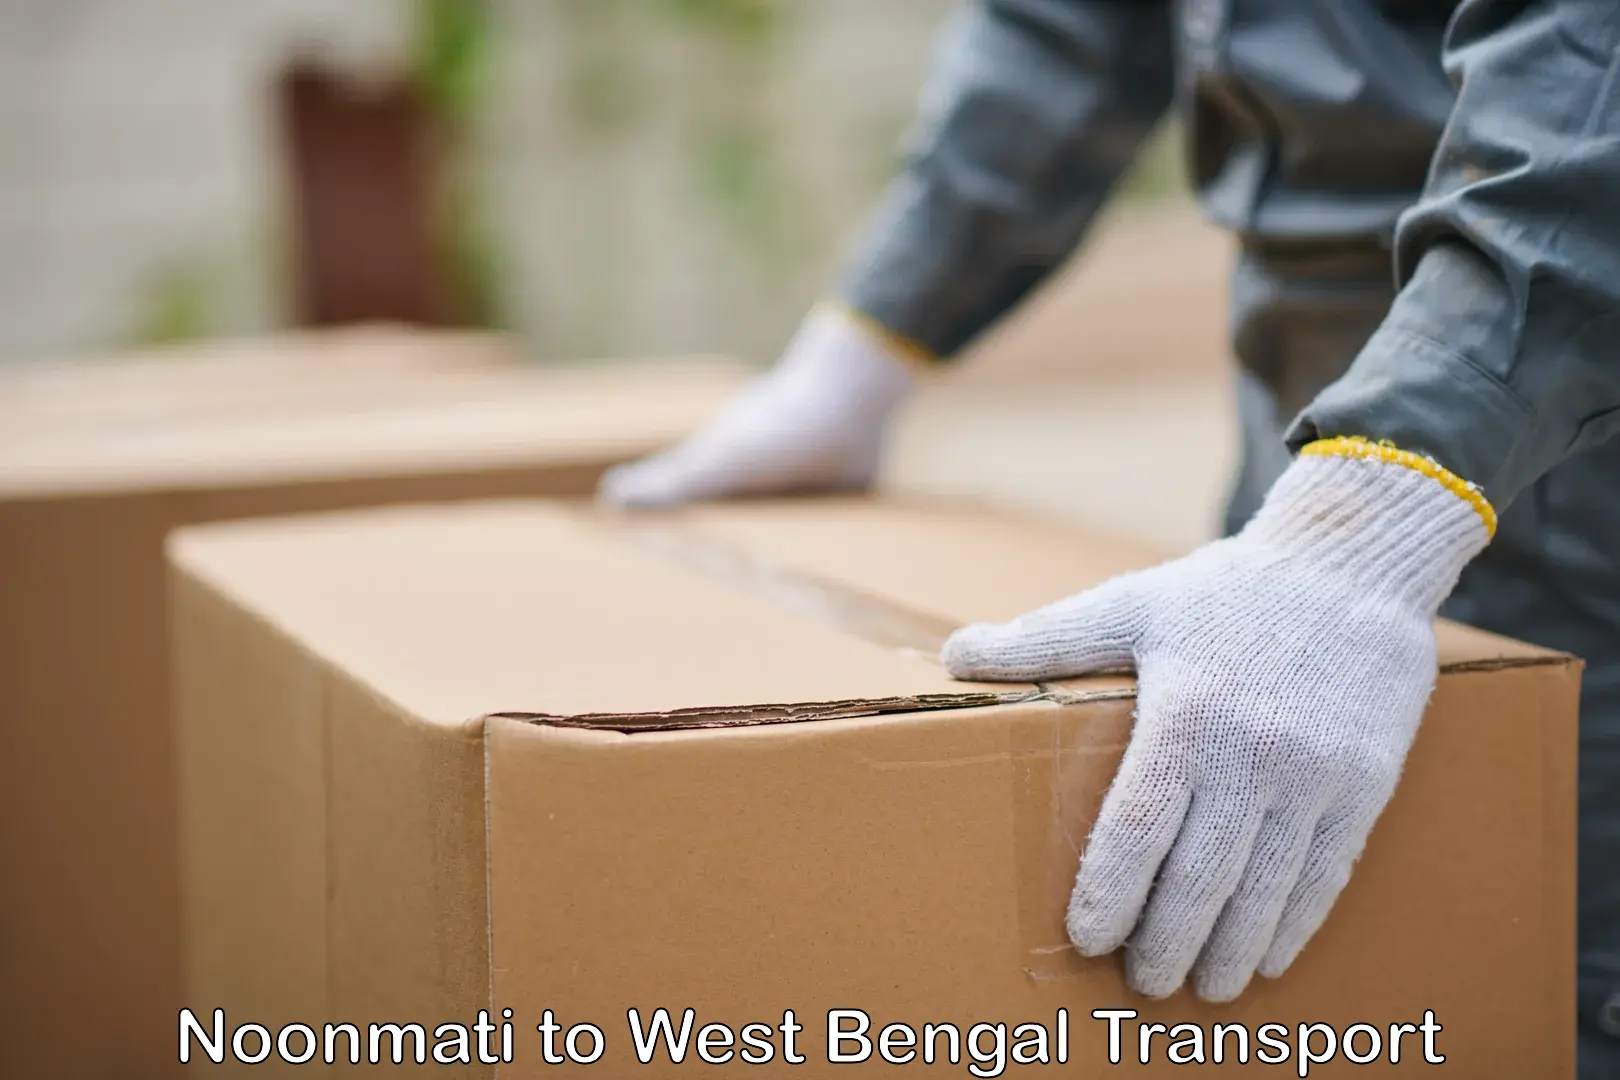 Cycle transportation service Noonmati to West Bengal